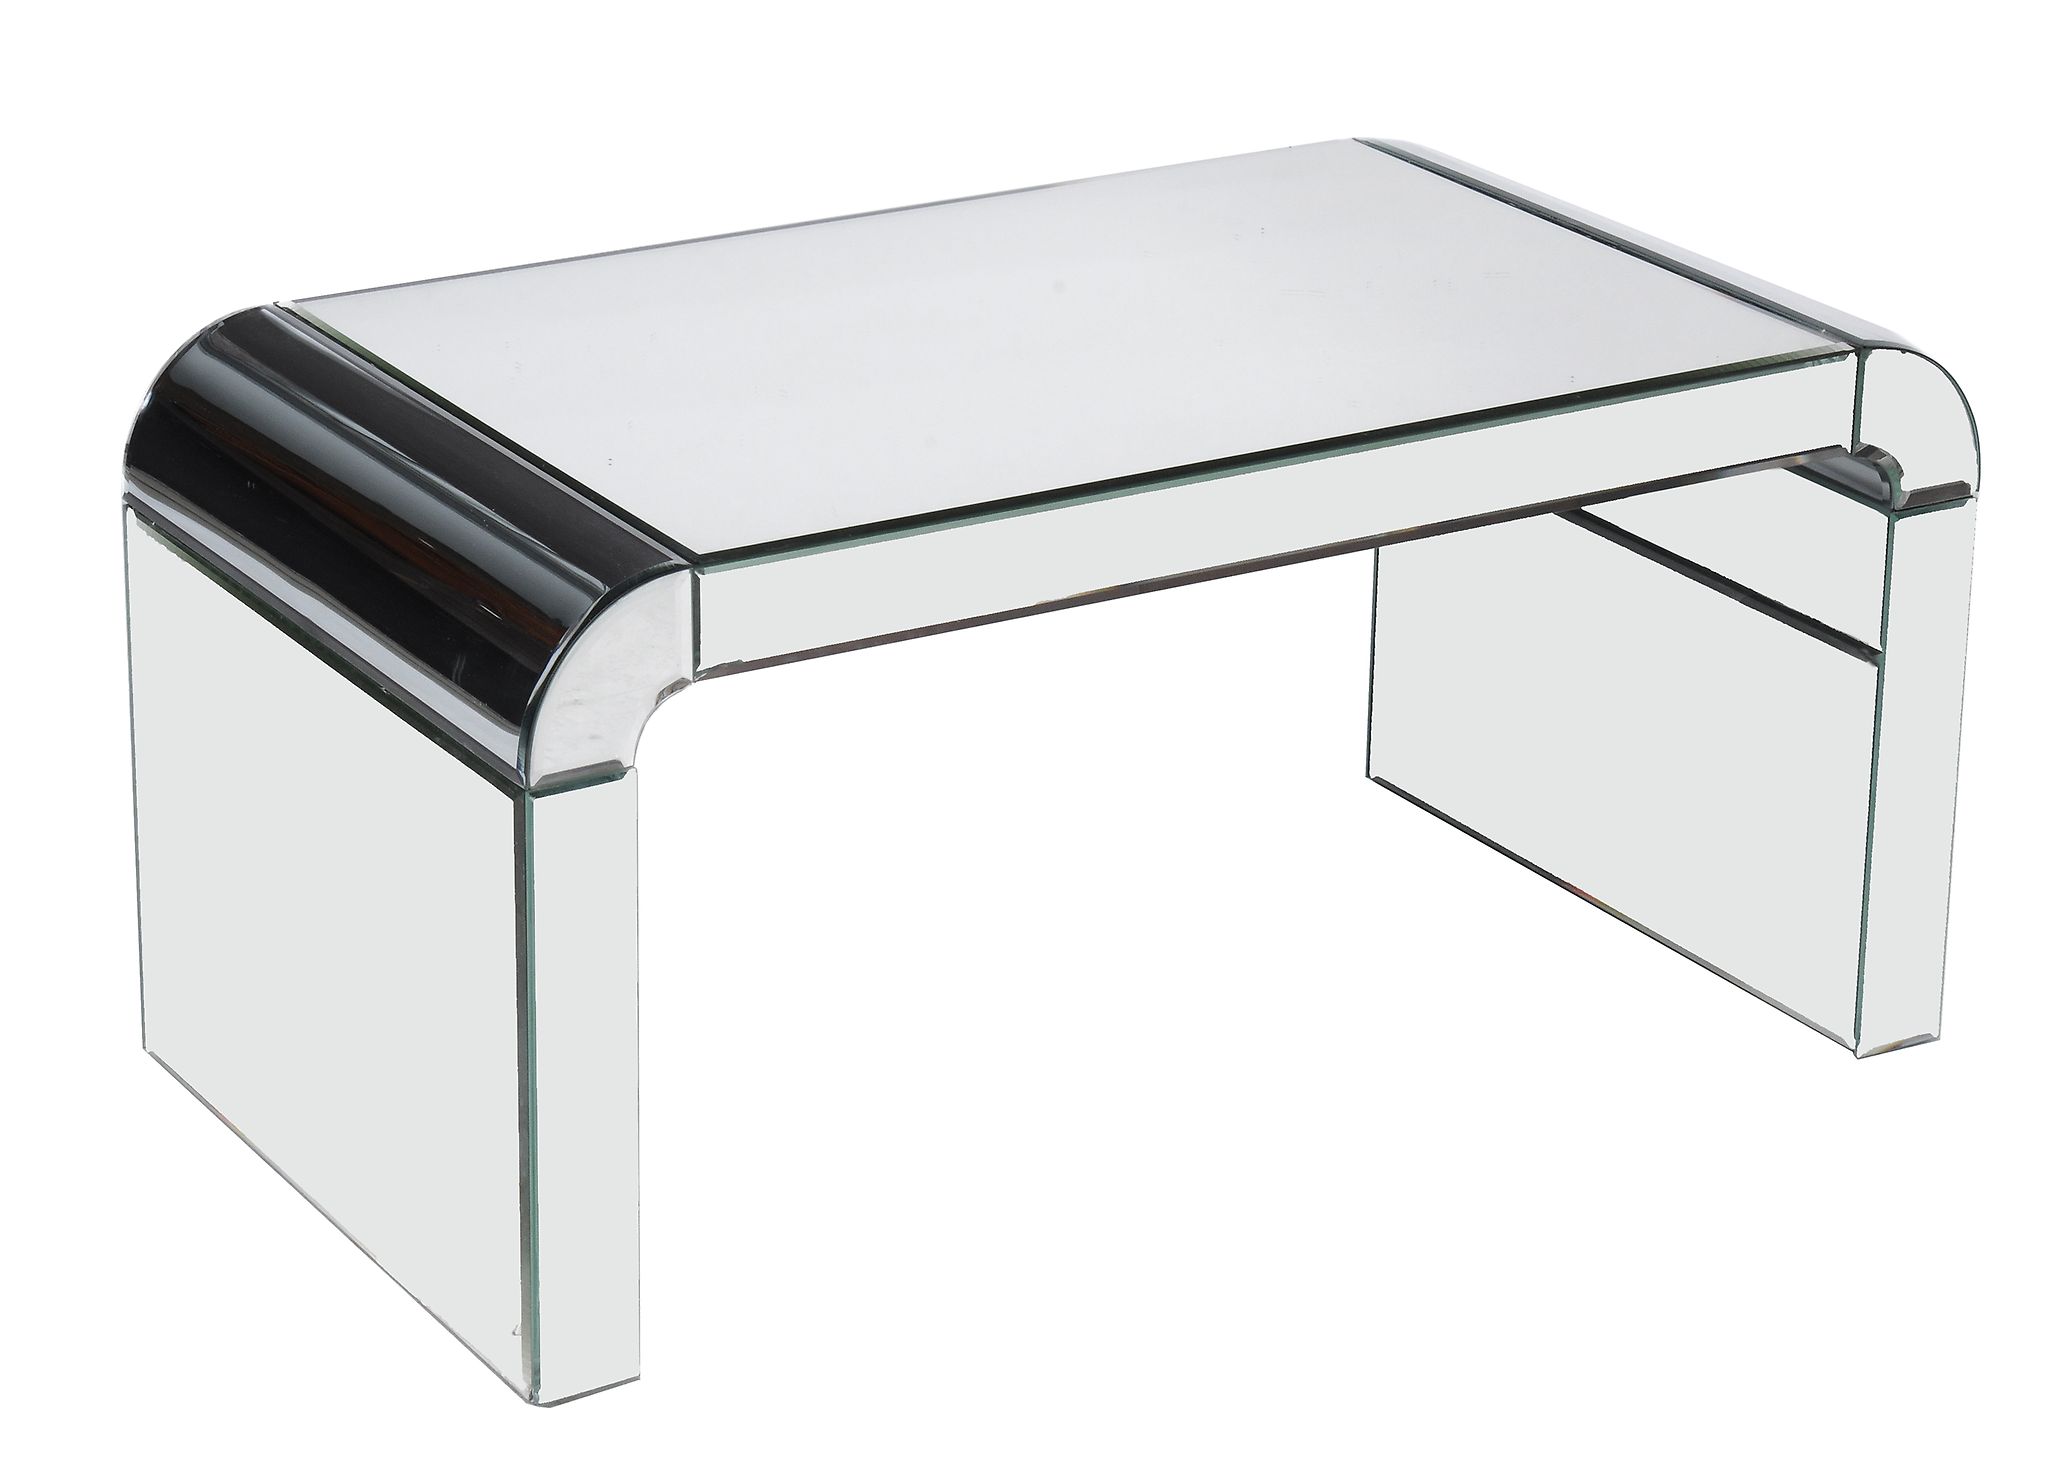 A rectangular coffee table, of recent manufacture, with rounded short ends  A rectangular coffee